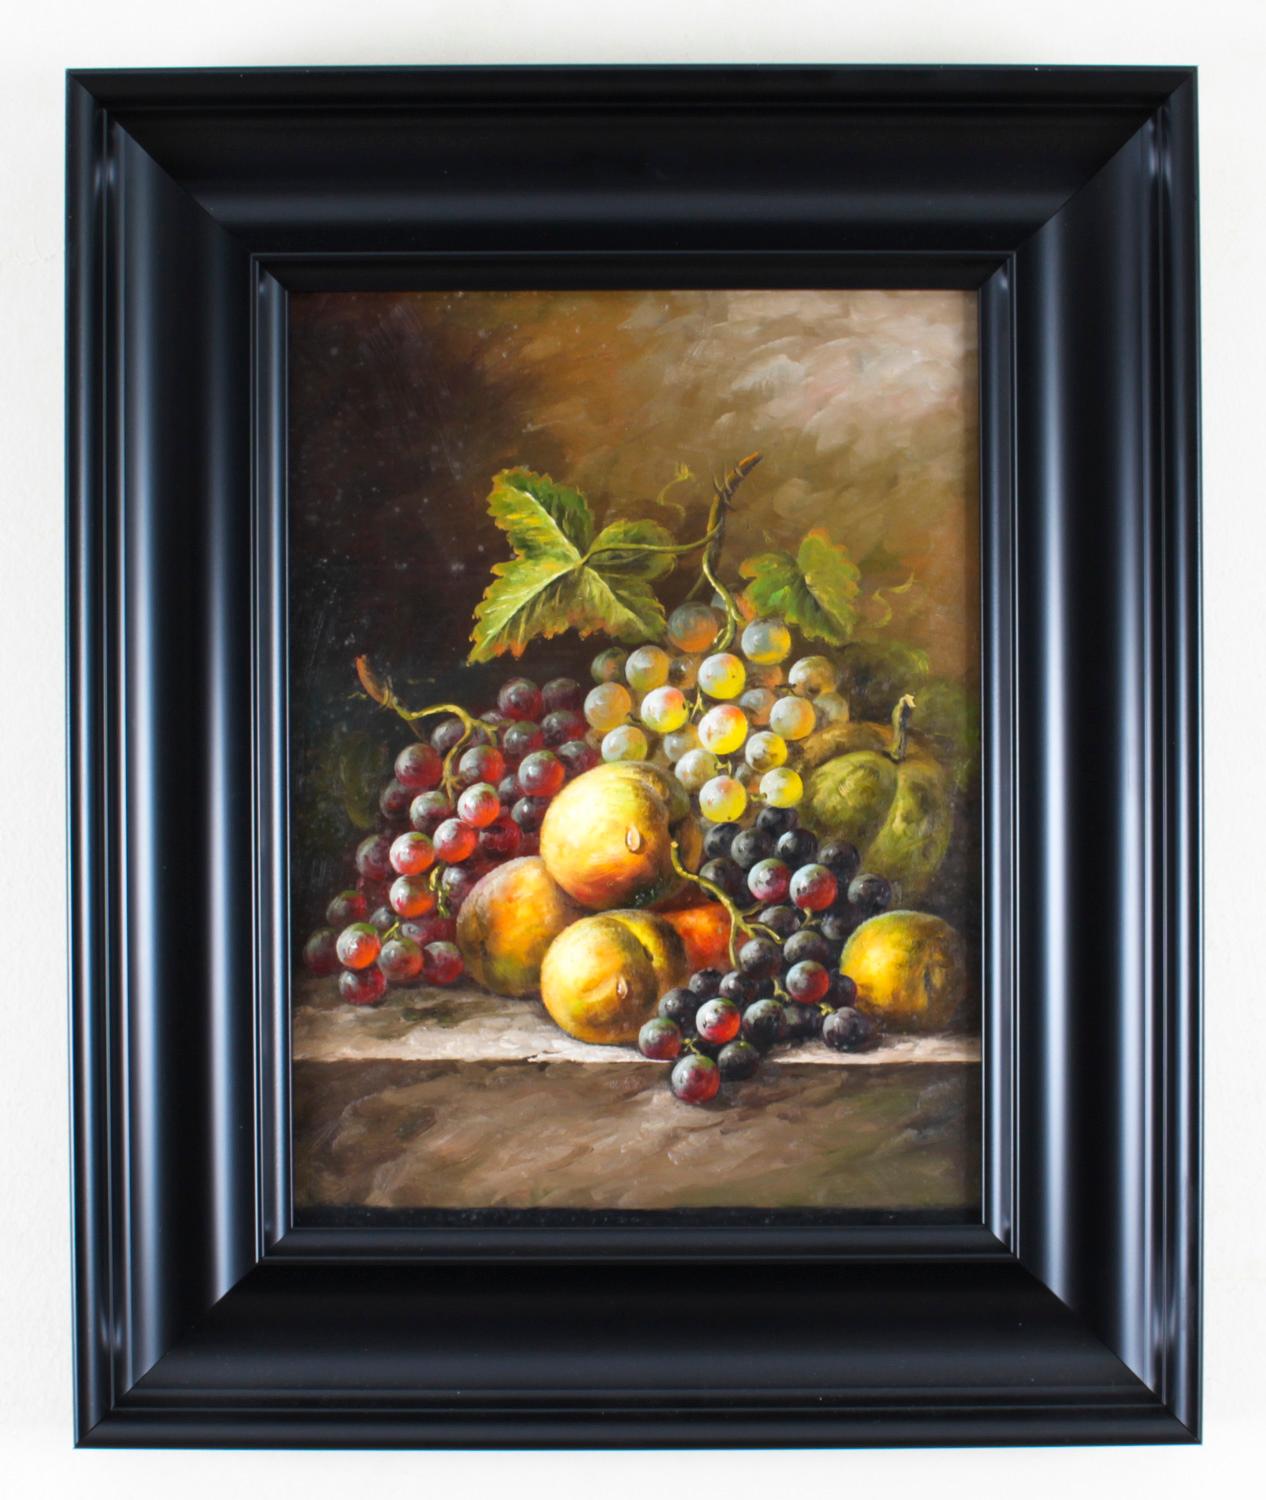 A delightful pair of vintage English oil on panel framed paintings in the Manner of Oliver Clare (1853-1927), mid 20th century in date.
The paintings present a pair of still lifes of fruit including grapes, melons and peaches, in a wicker basket on